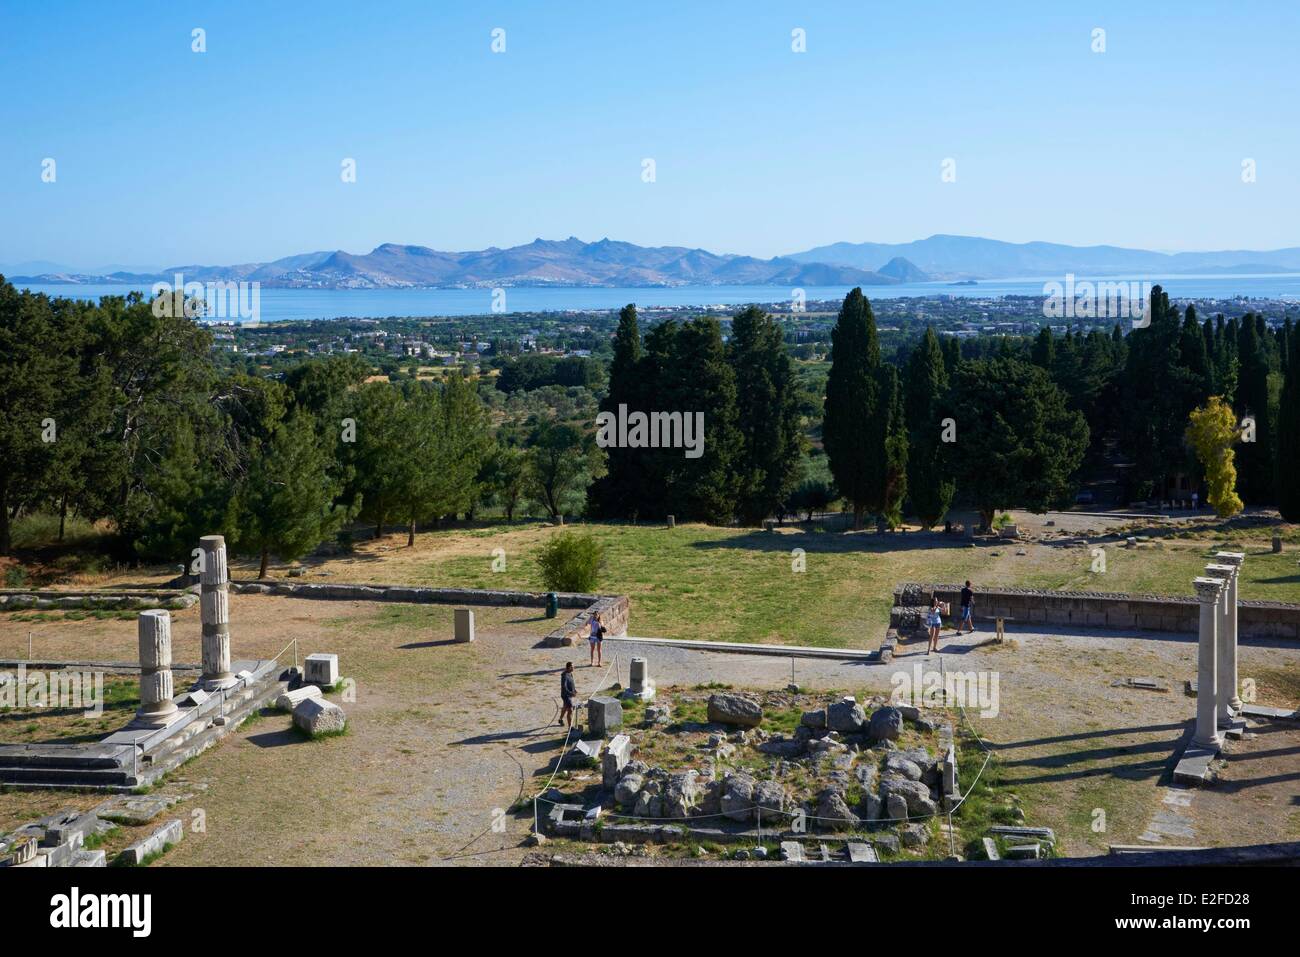 Greece, Dodecanese, Kos Island, Columns in the Ancient Greek city of Asklepieion Stock Photo